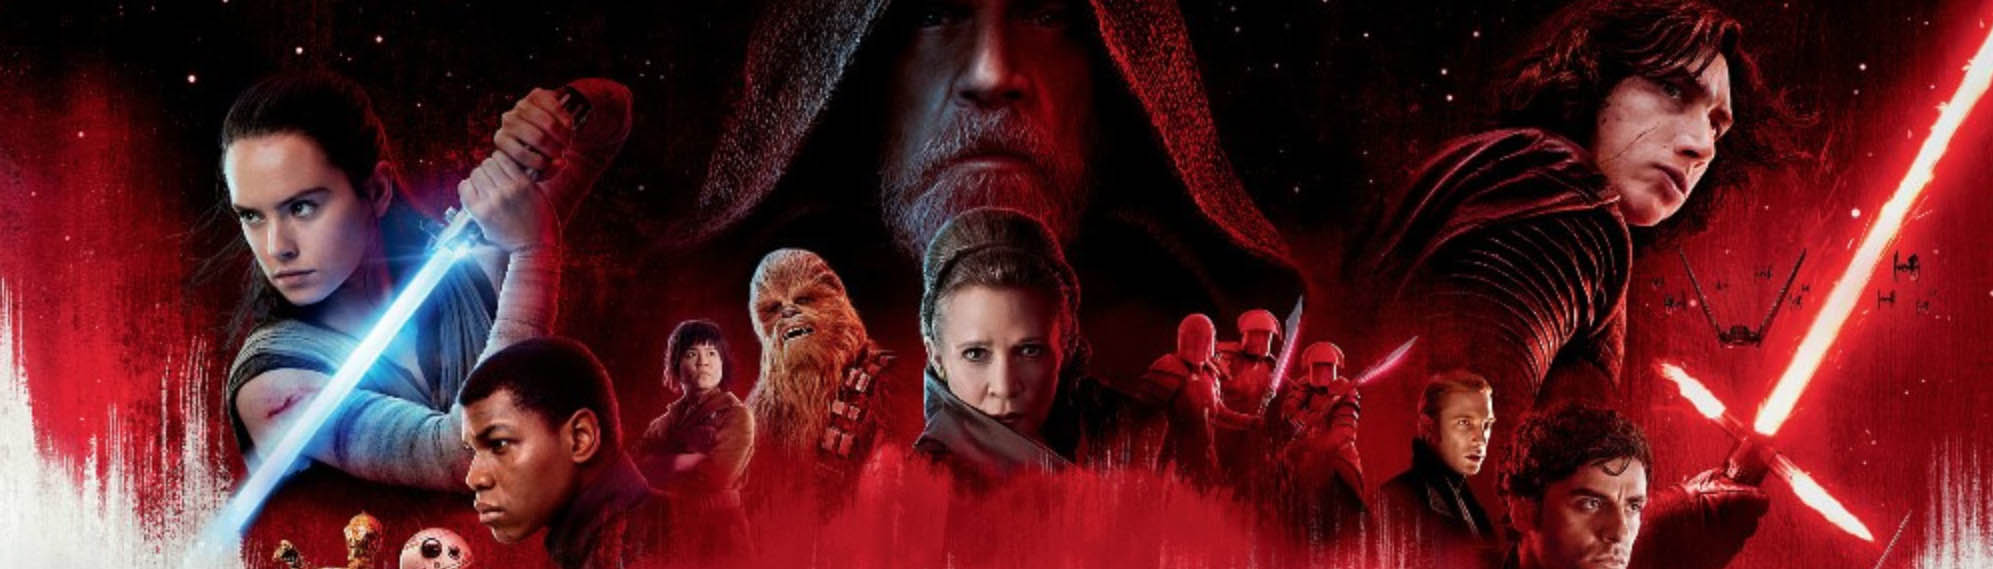 My thoughts on ‘Star Wars: The Last Jedi’ after one viewing